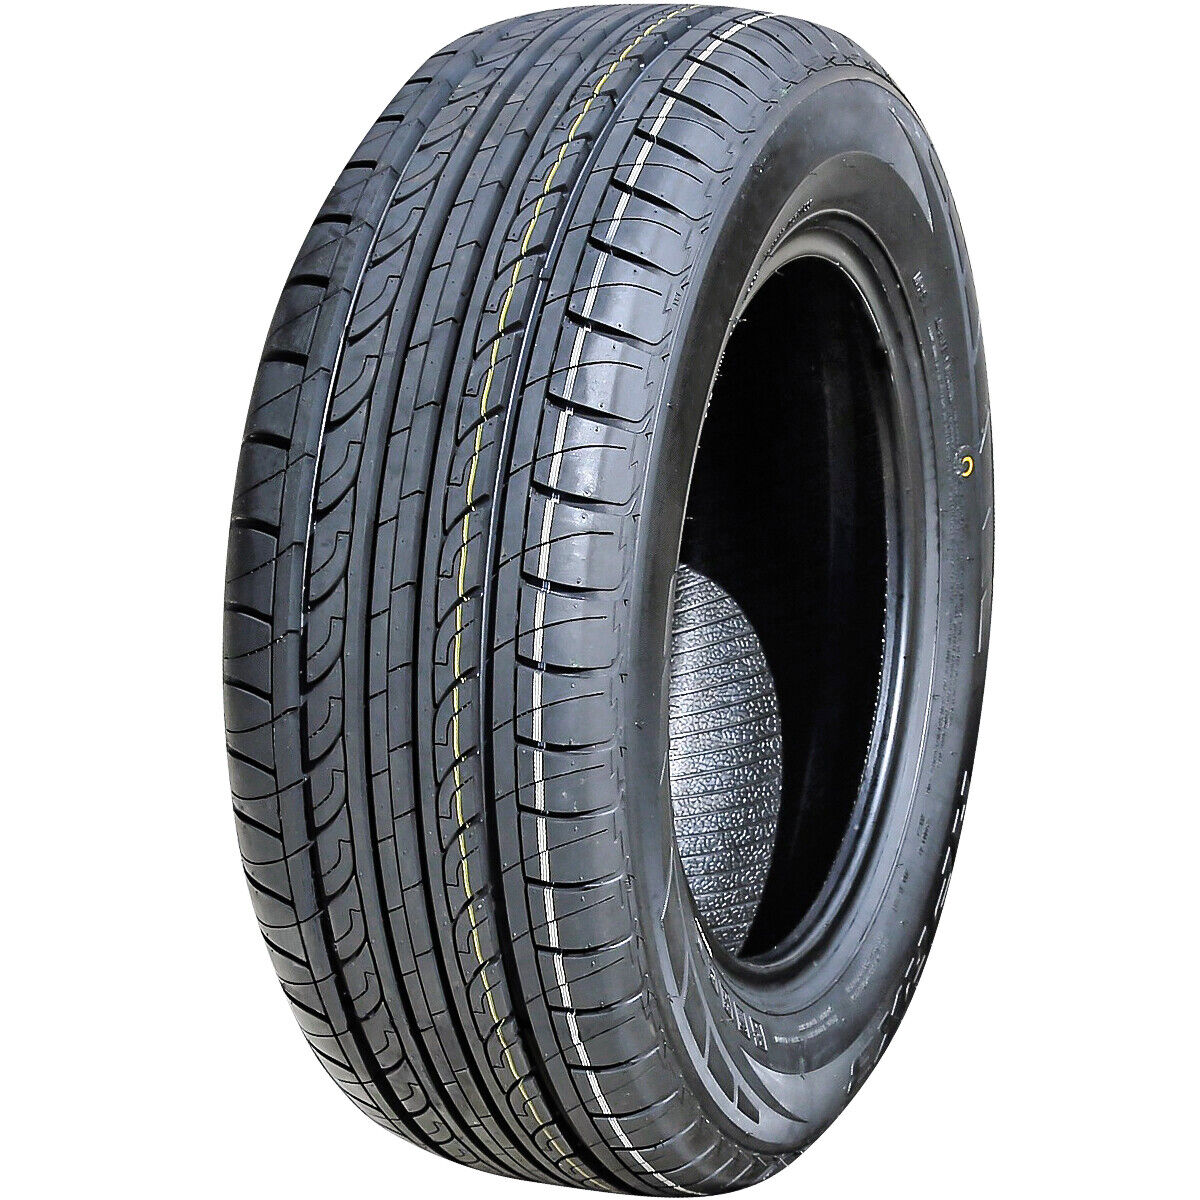 Tire Ardent HP RX3 195/65R15 95H XL AS A/S Performance